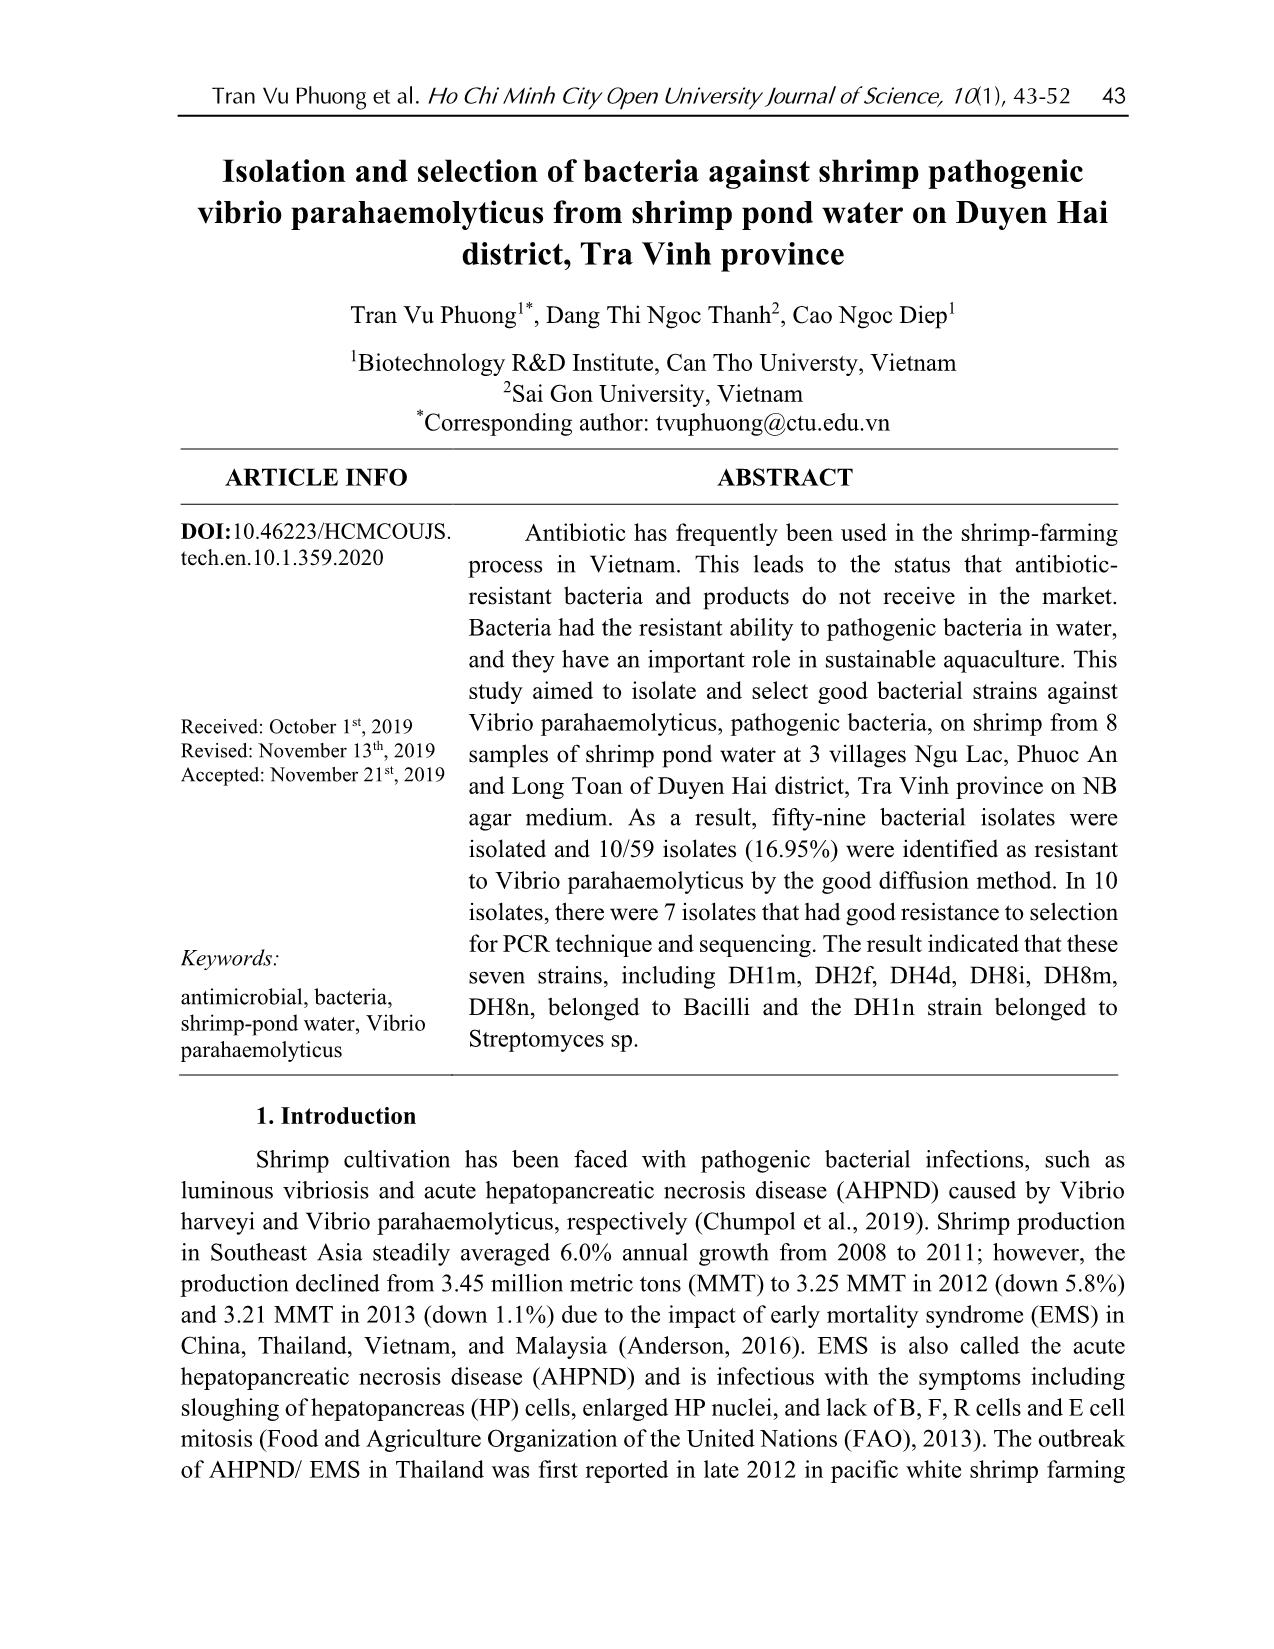 Isolation and selection of bacteria against shrimp pathogenic vibrio parahaemolyticus from shrimp pond water on Duyen Hai district, Tra Vinh province trang 1